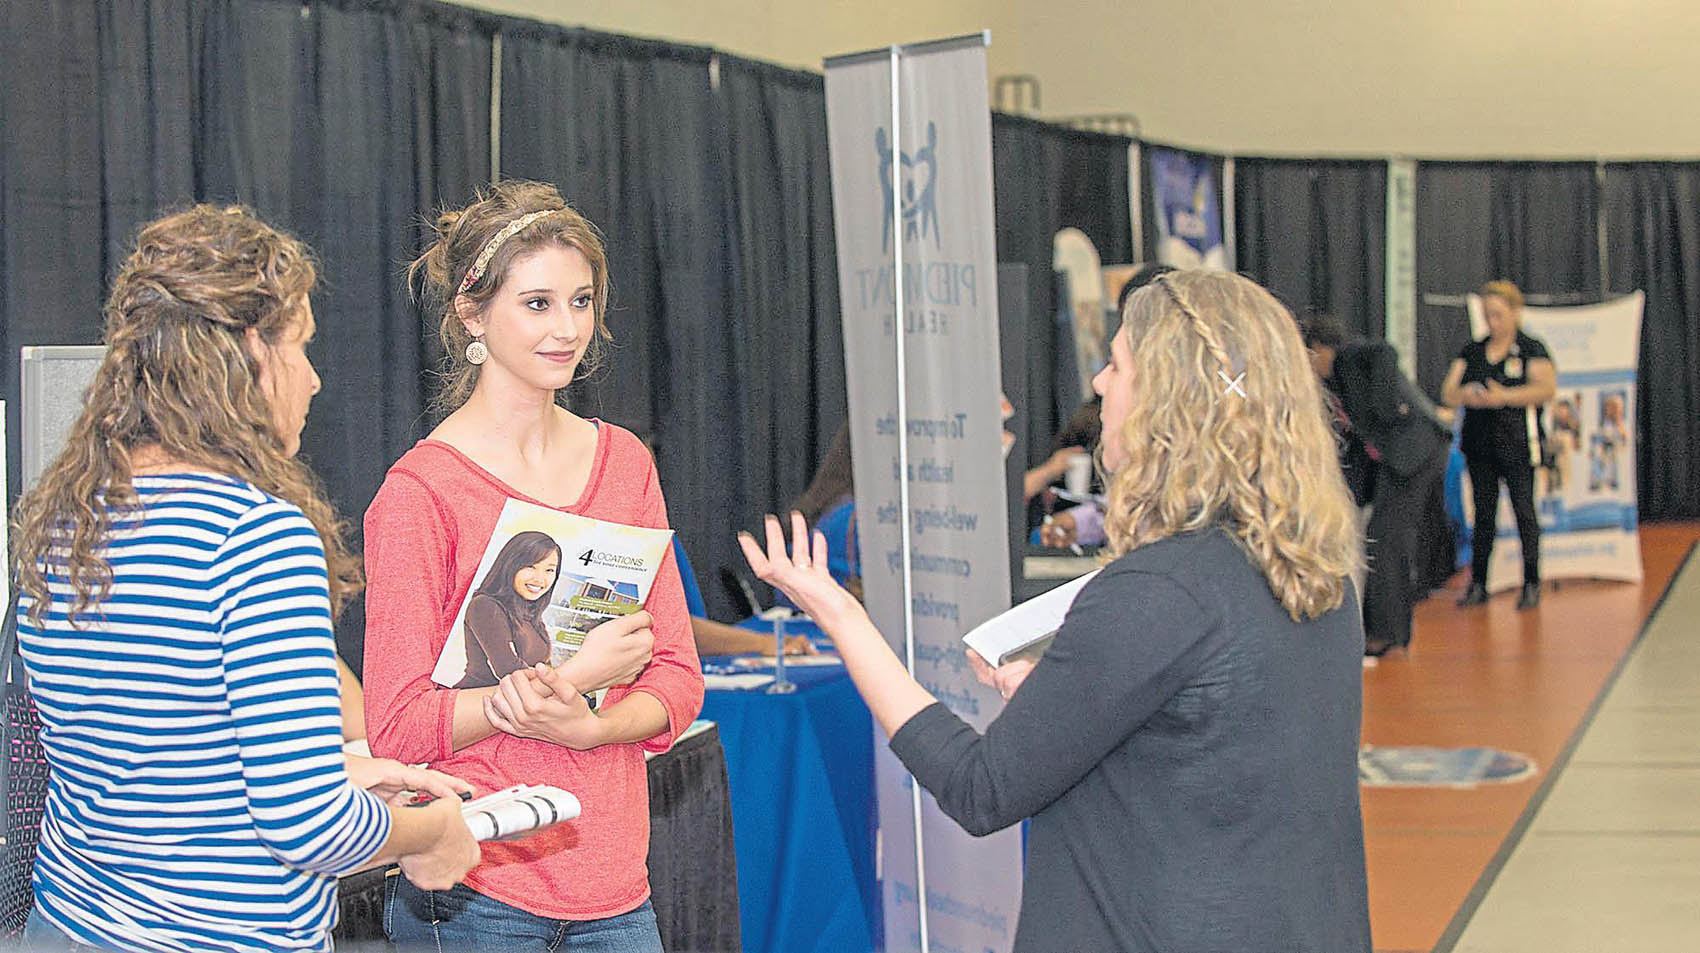 Health care career fair provides opportunities to students